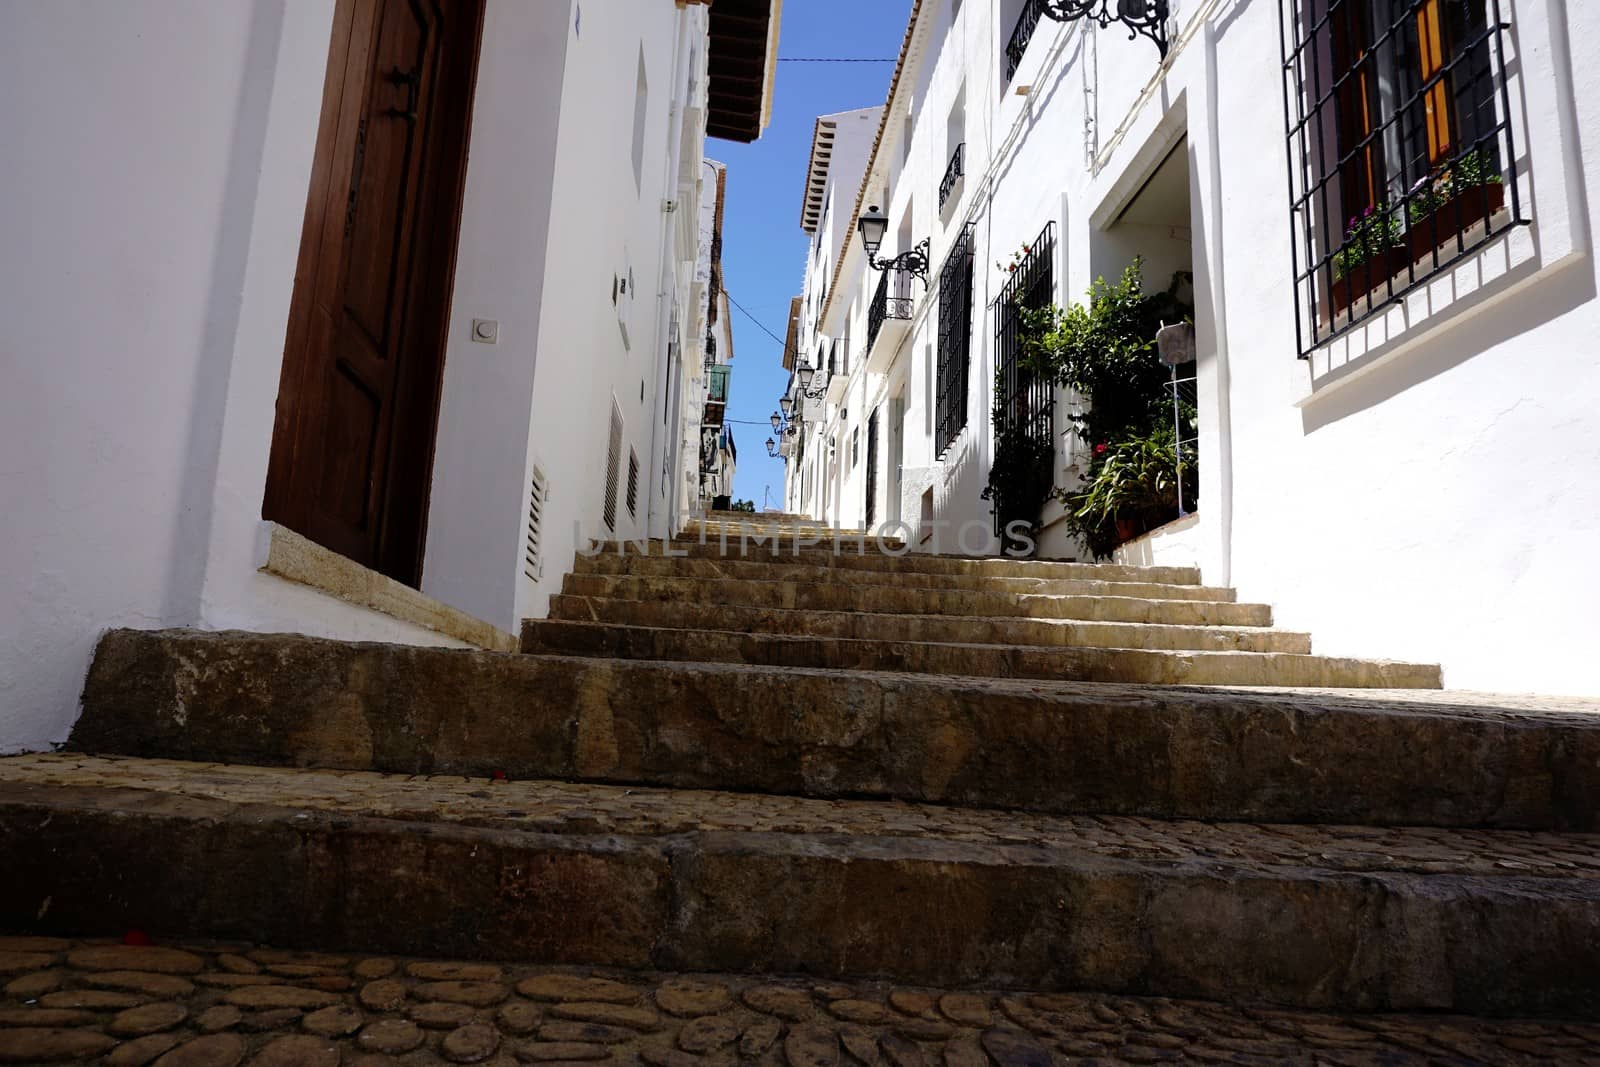 Stairs in the old town of Altea, Spain